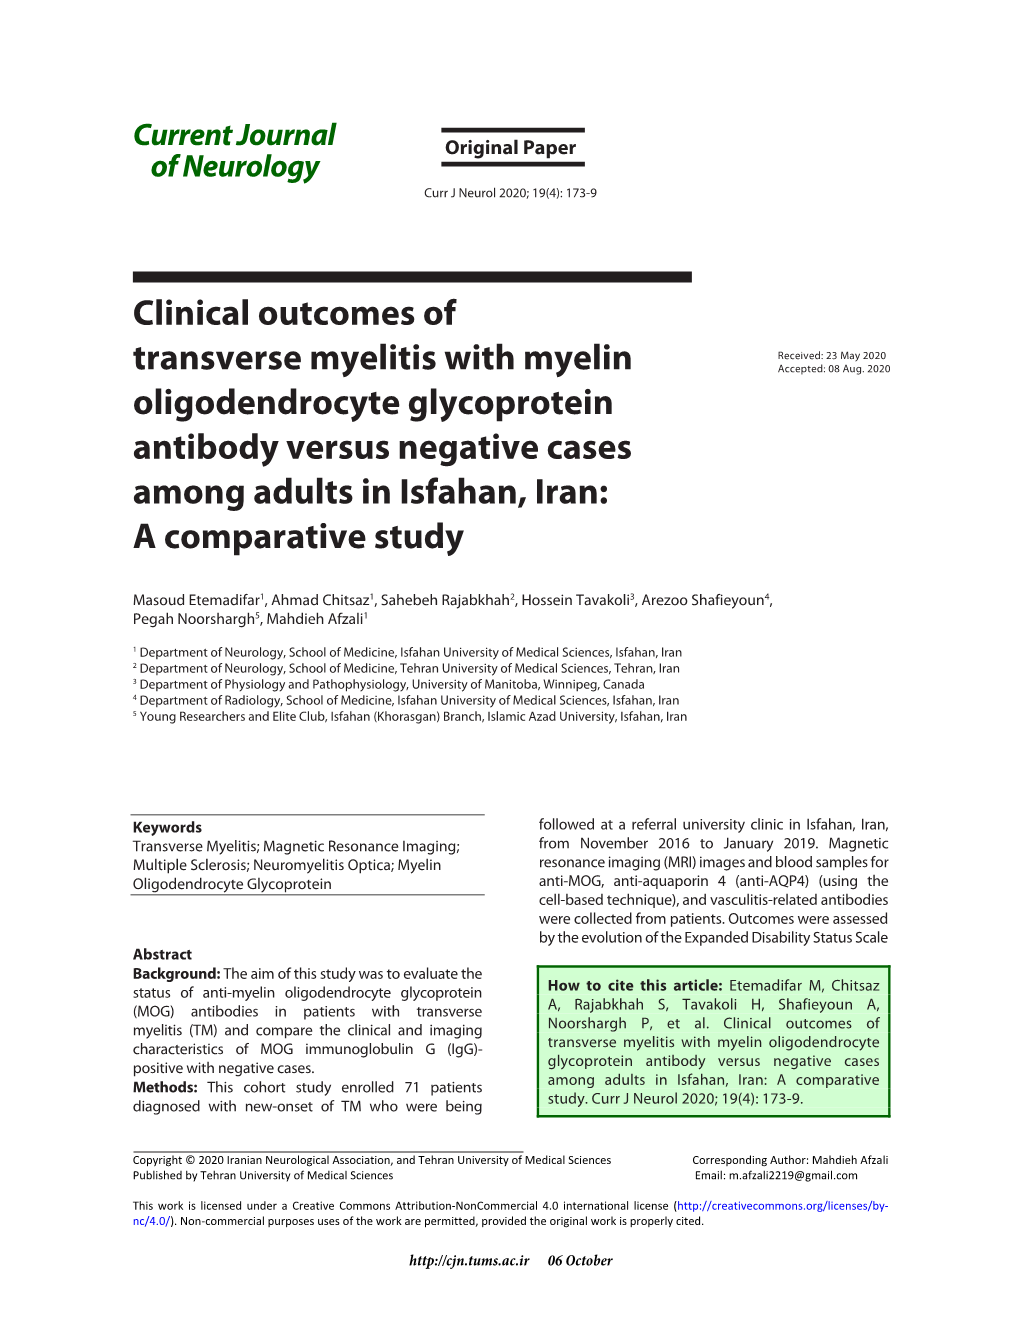 Clinical Outcomes of Transverse Myelitis with Myelin